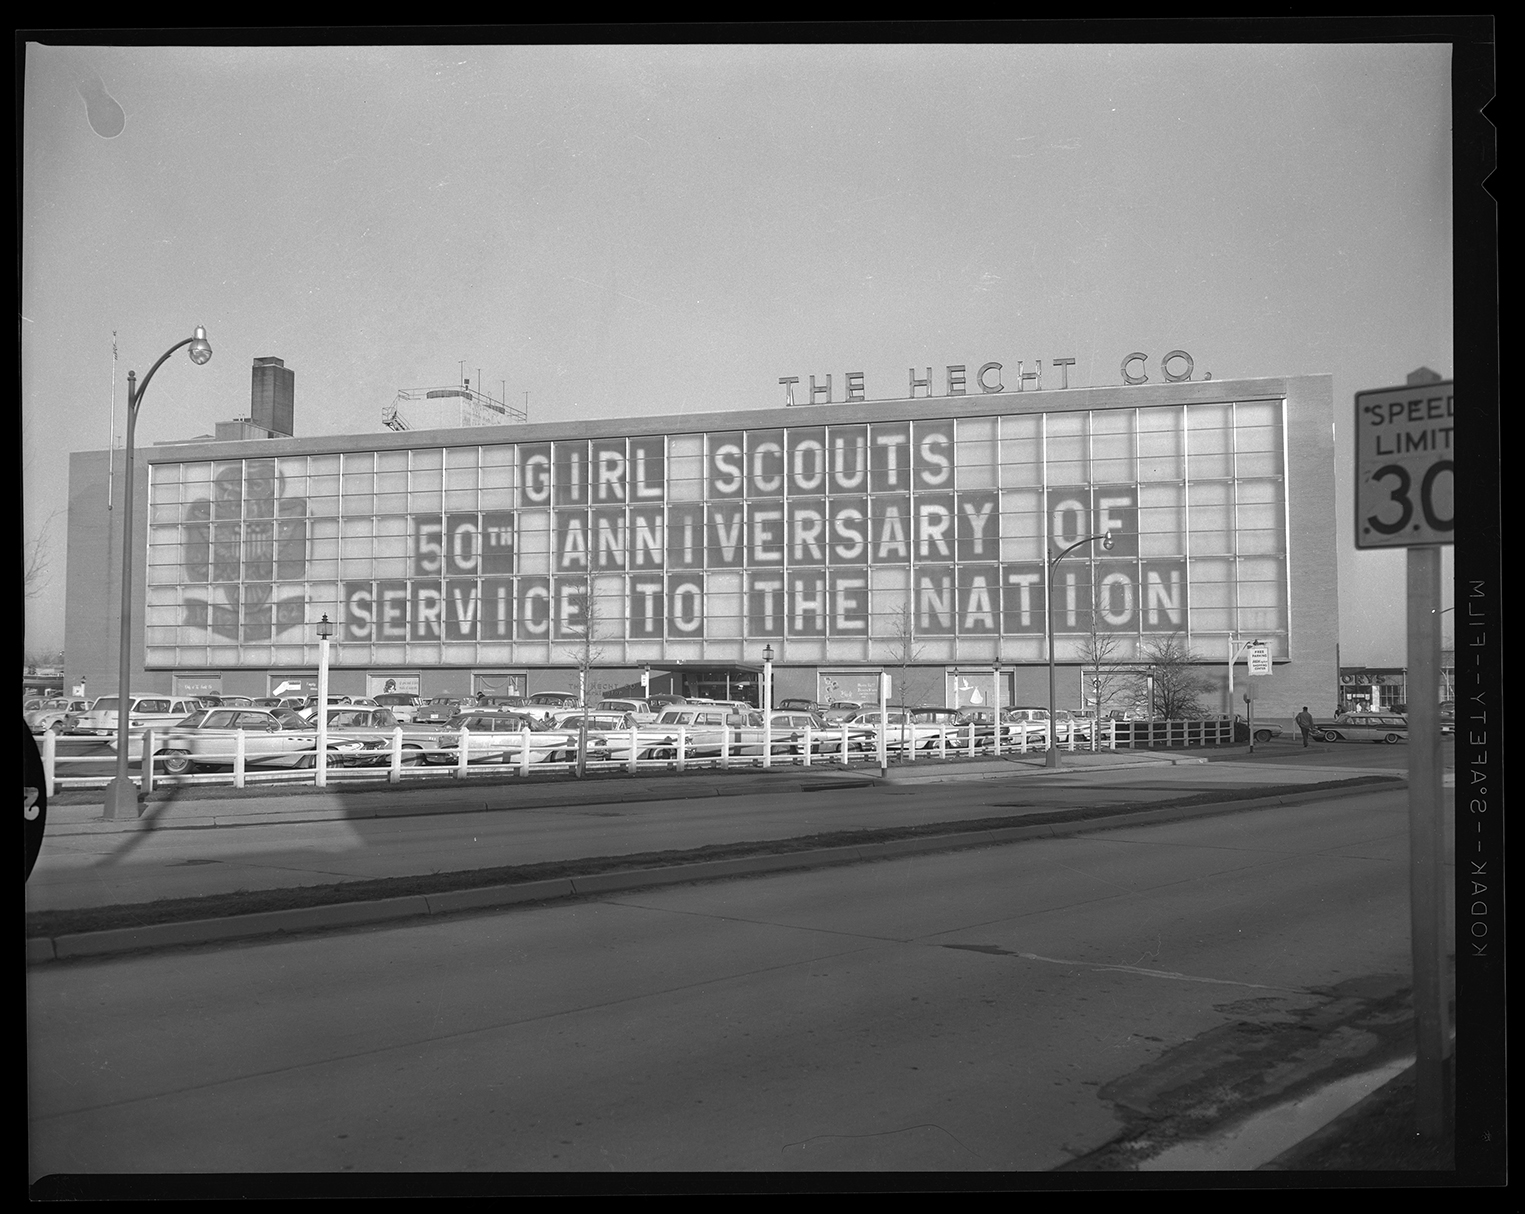 The large Hecht's window with lettering that says Girl Scouts 50th Anniversary of Service to the Nation.